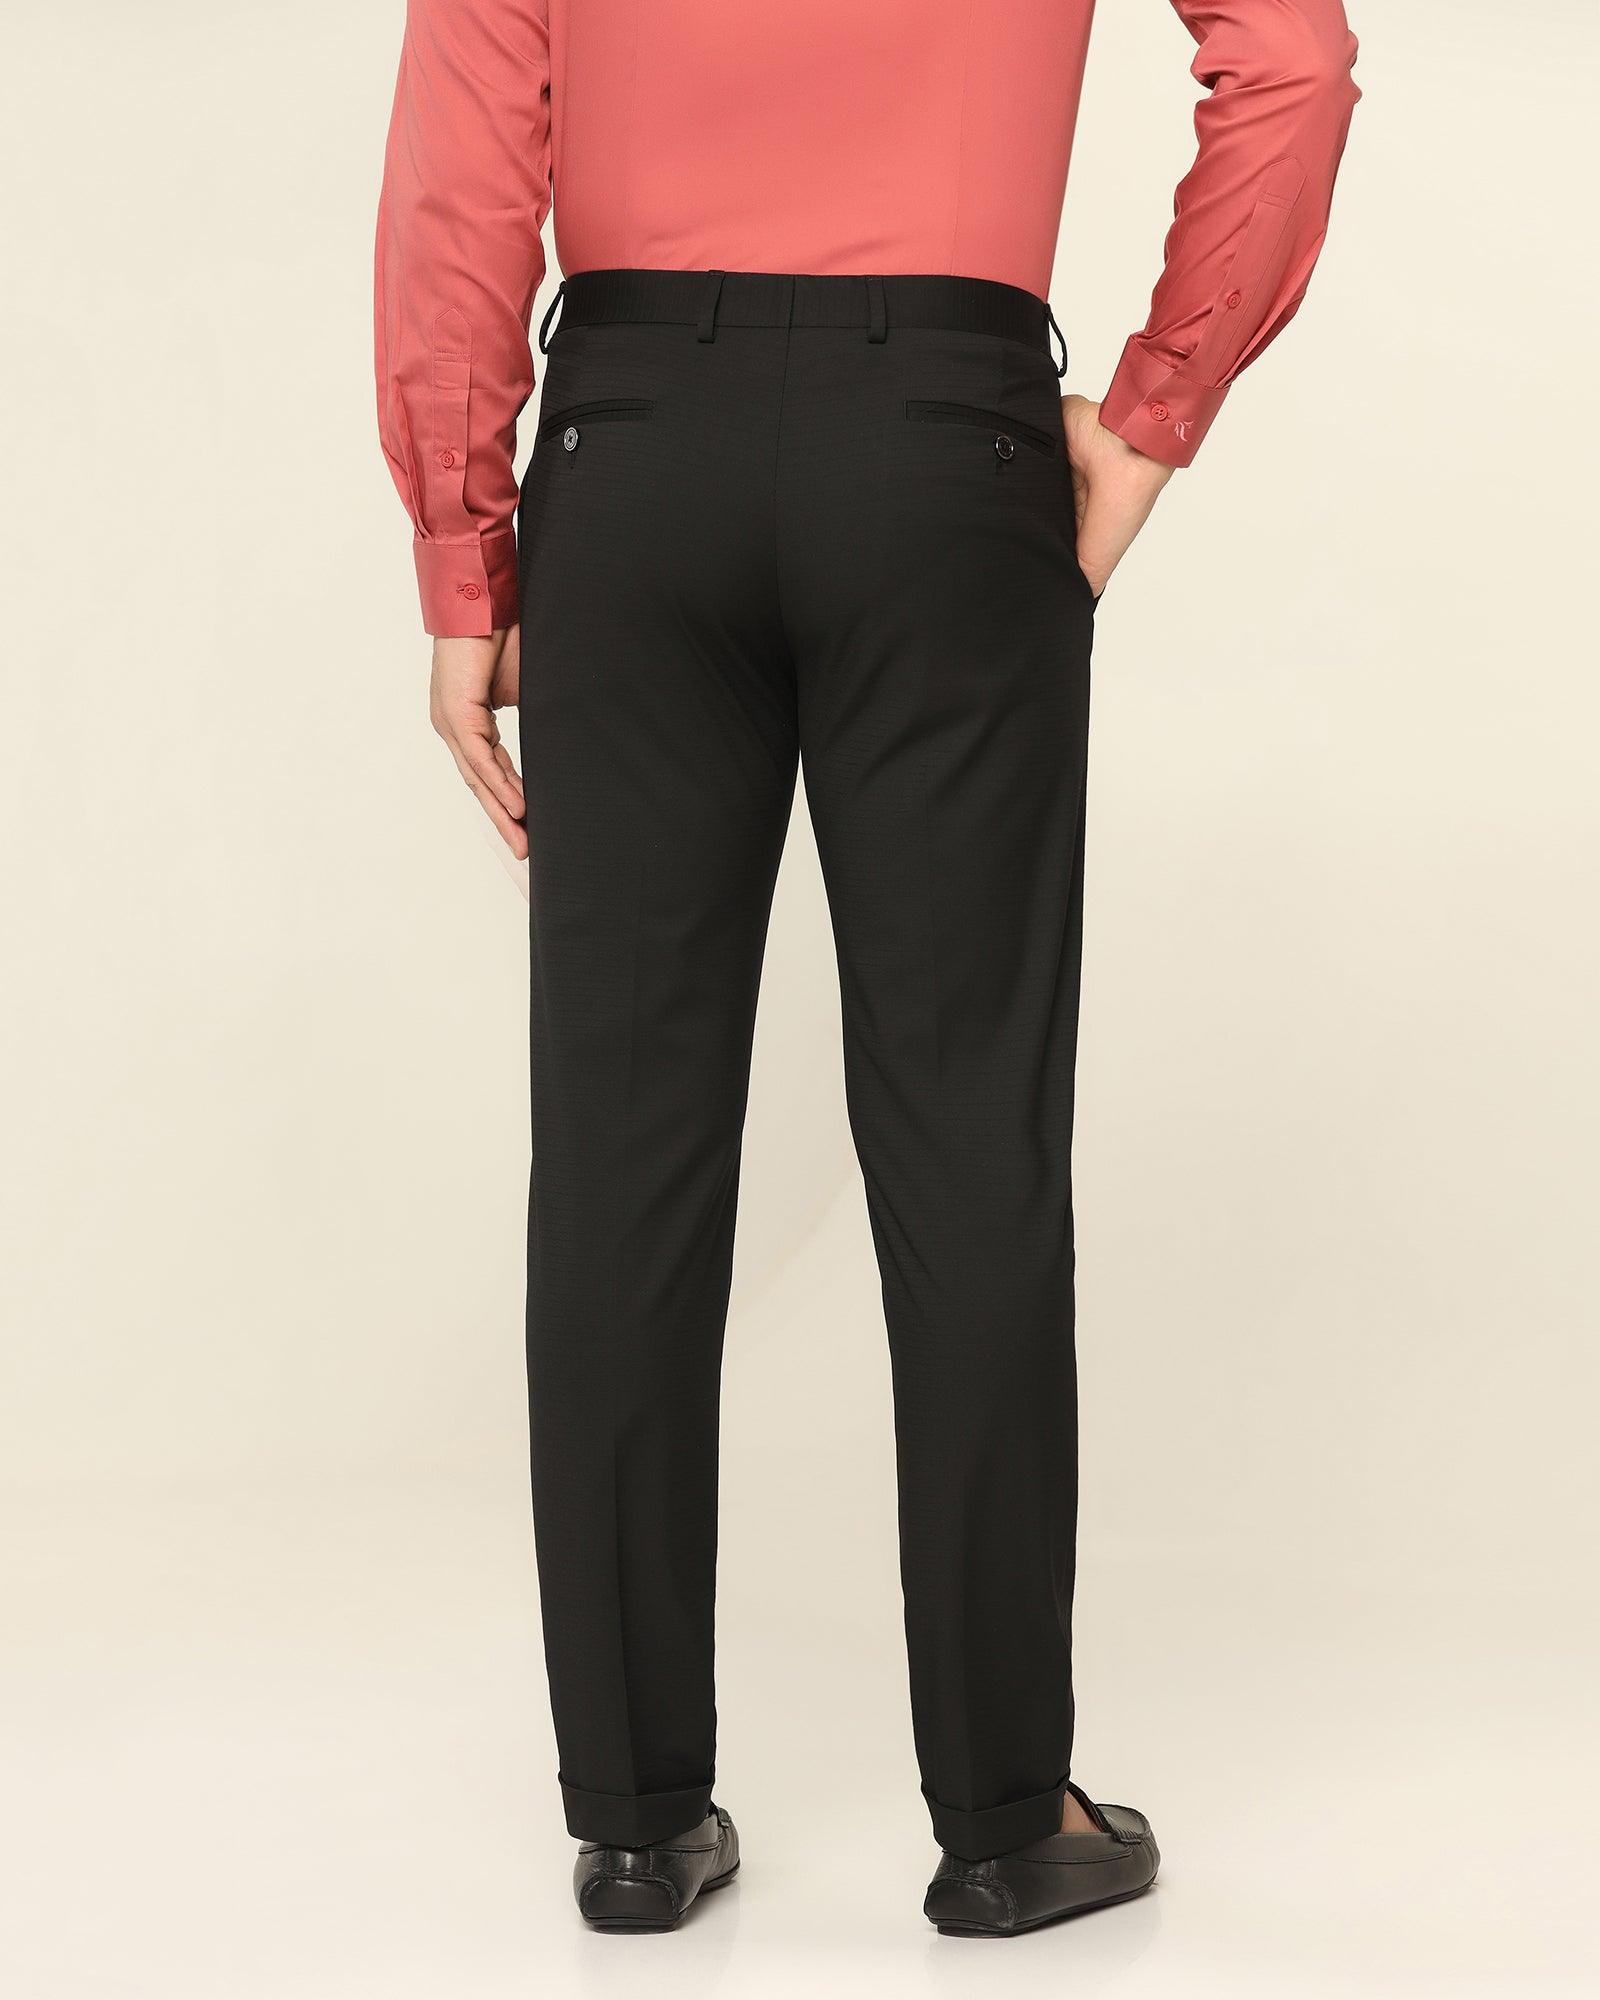 Beige Textured Ankle-Length Formal Men Ultra Slim Fit Trousers - Selling  Fast at Pantaloons.com